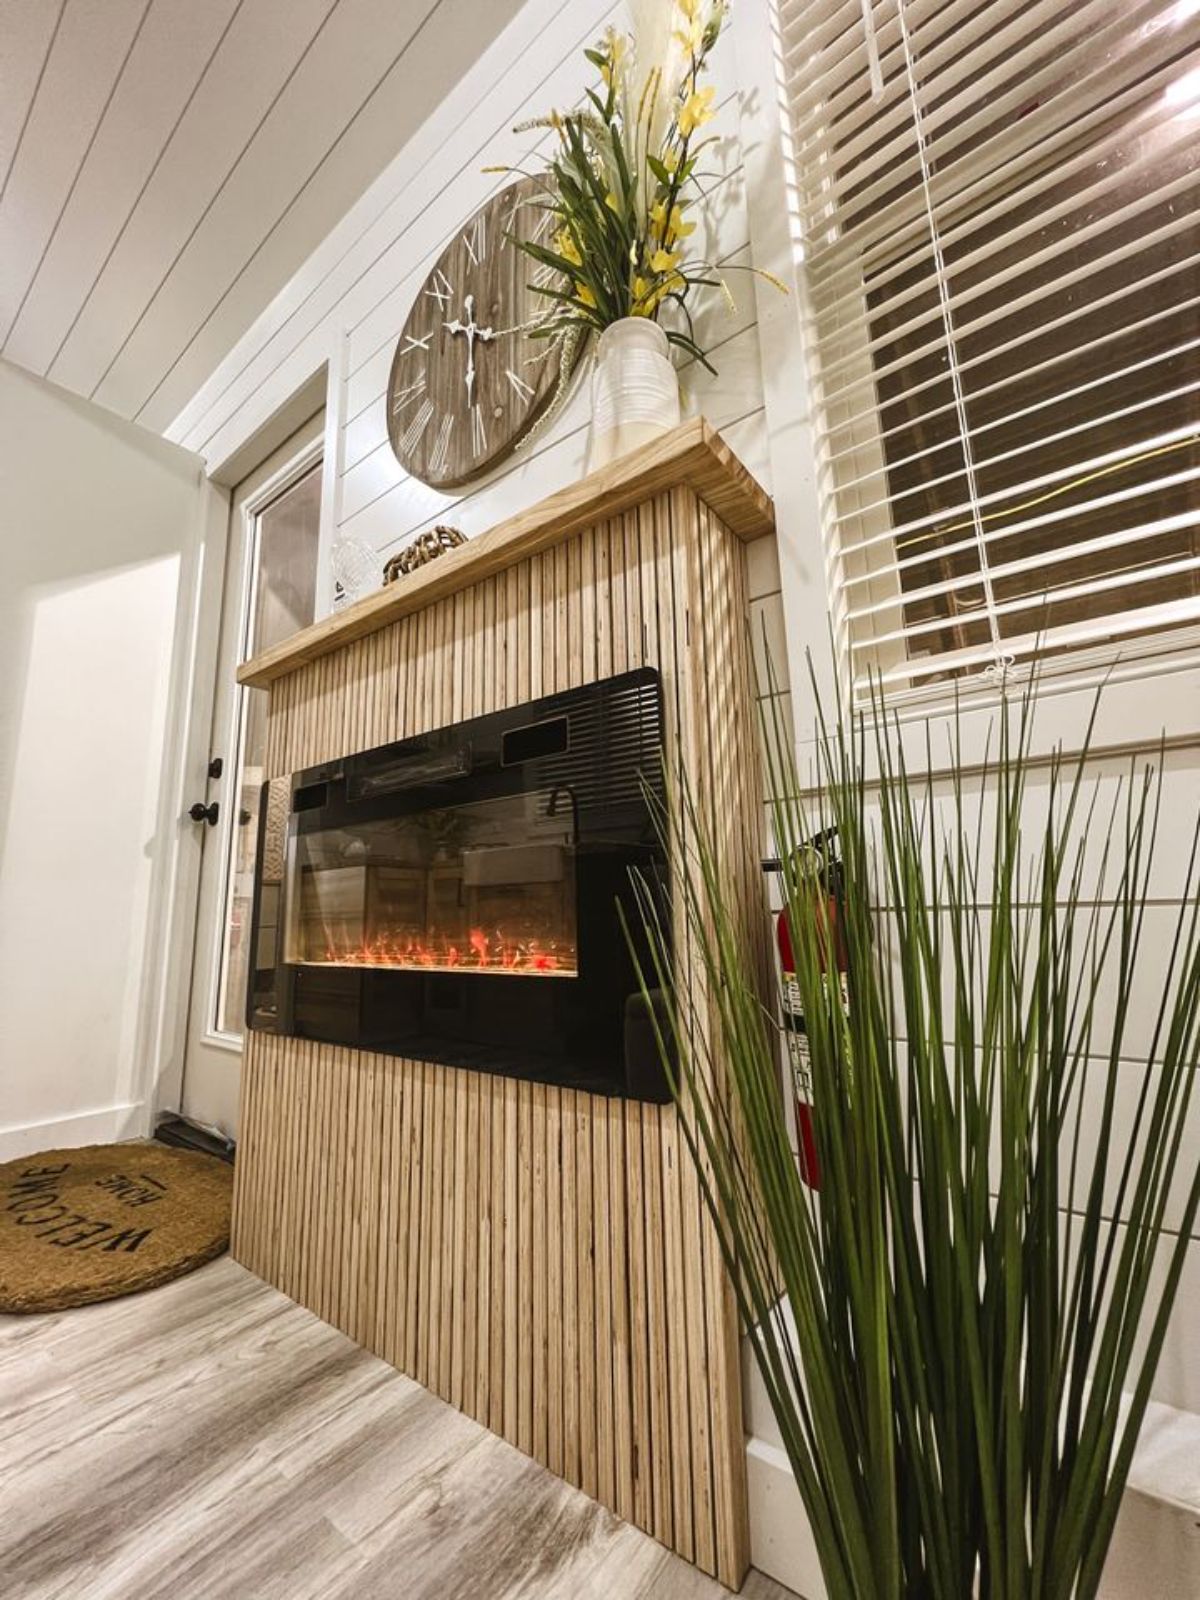 and electric fire place in living area makes the house warmer during winter